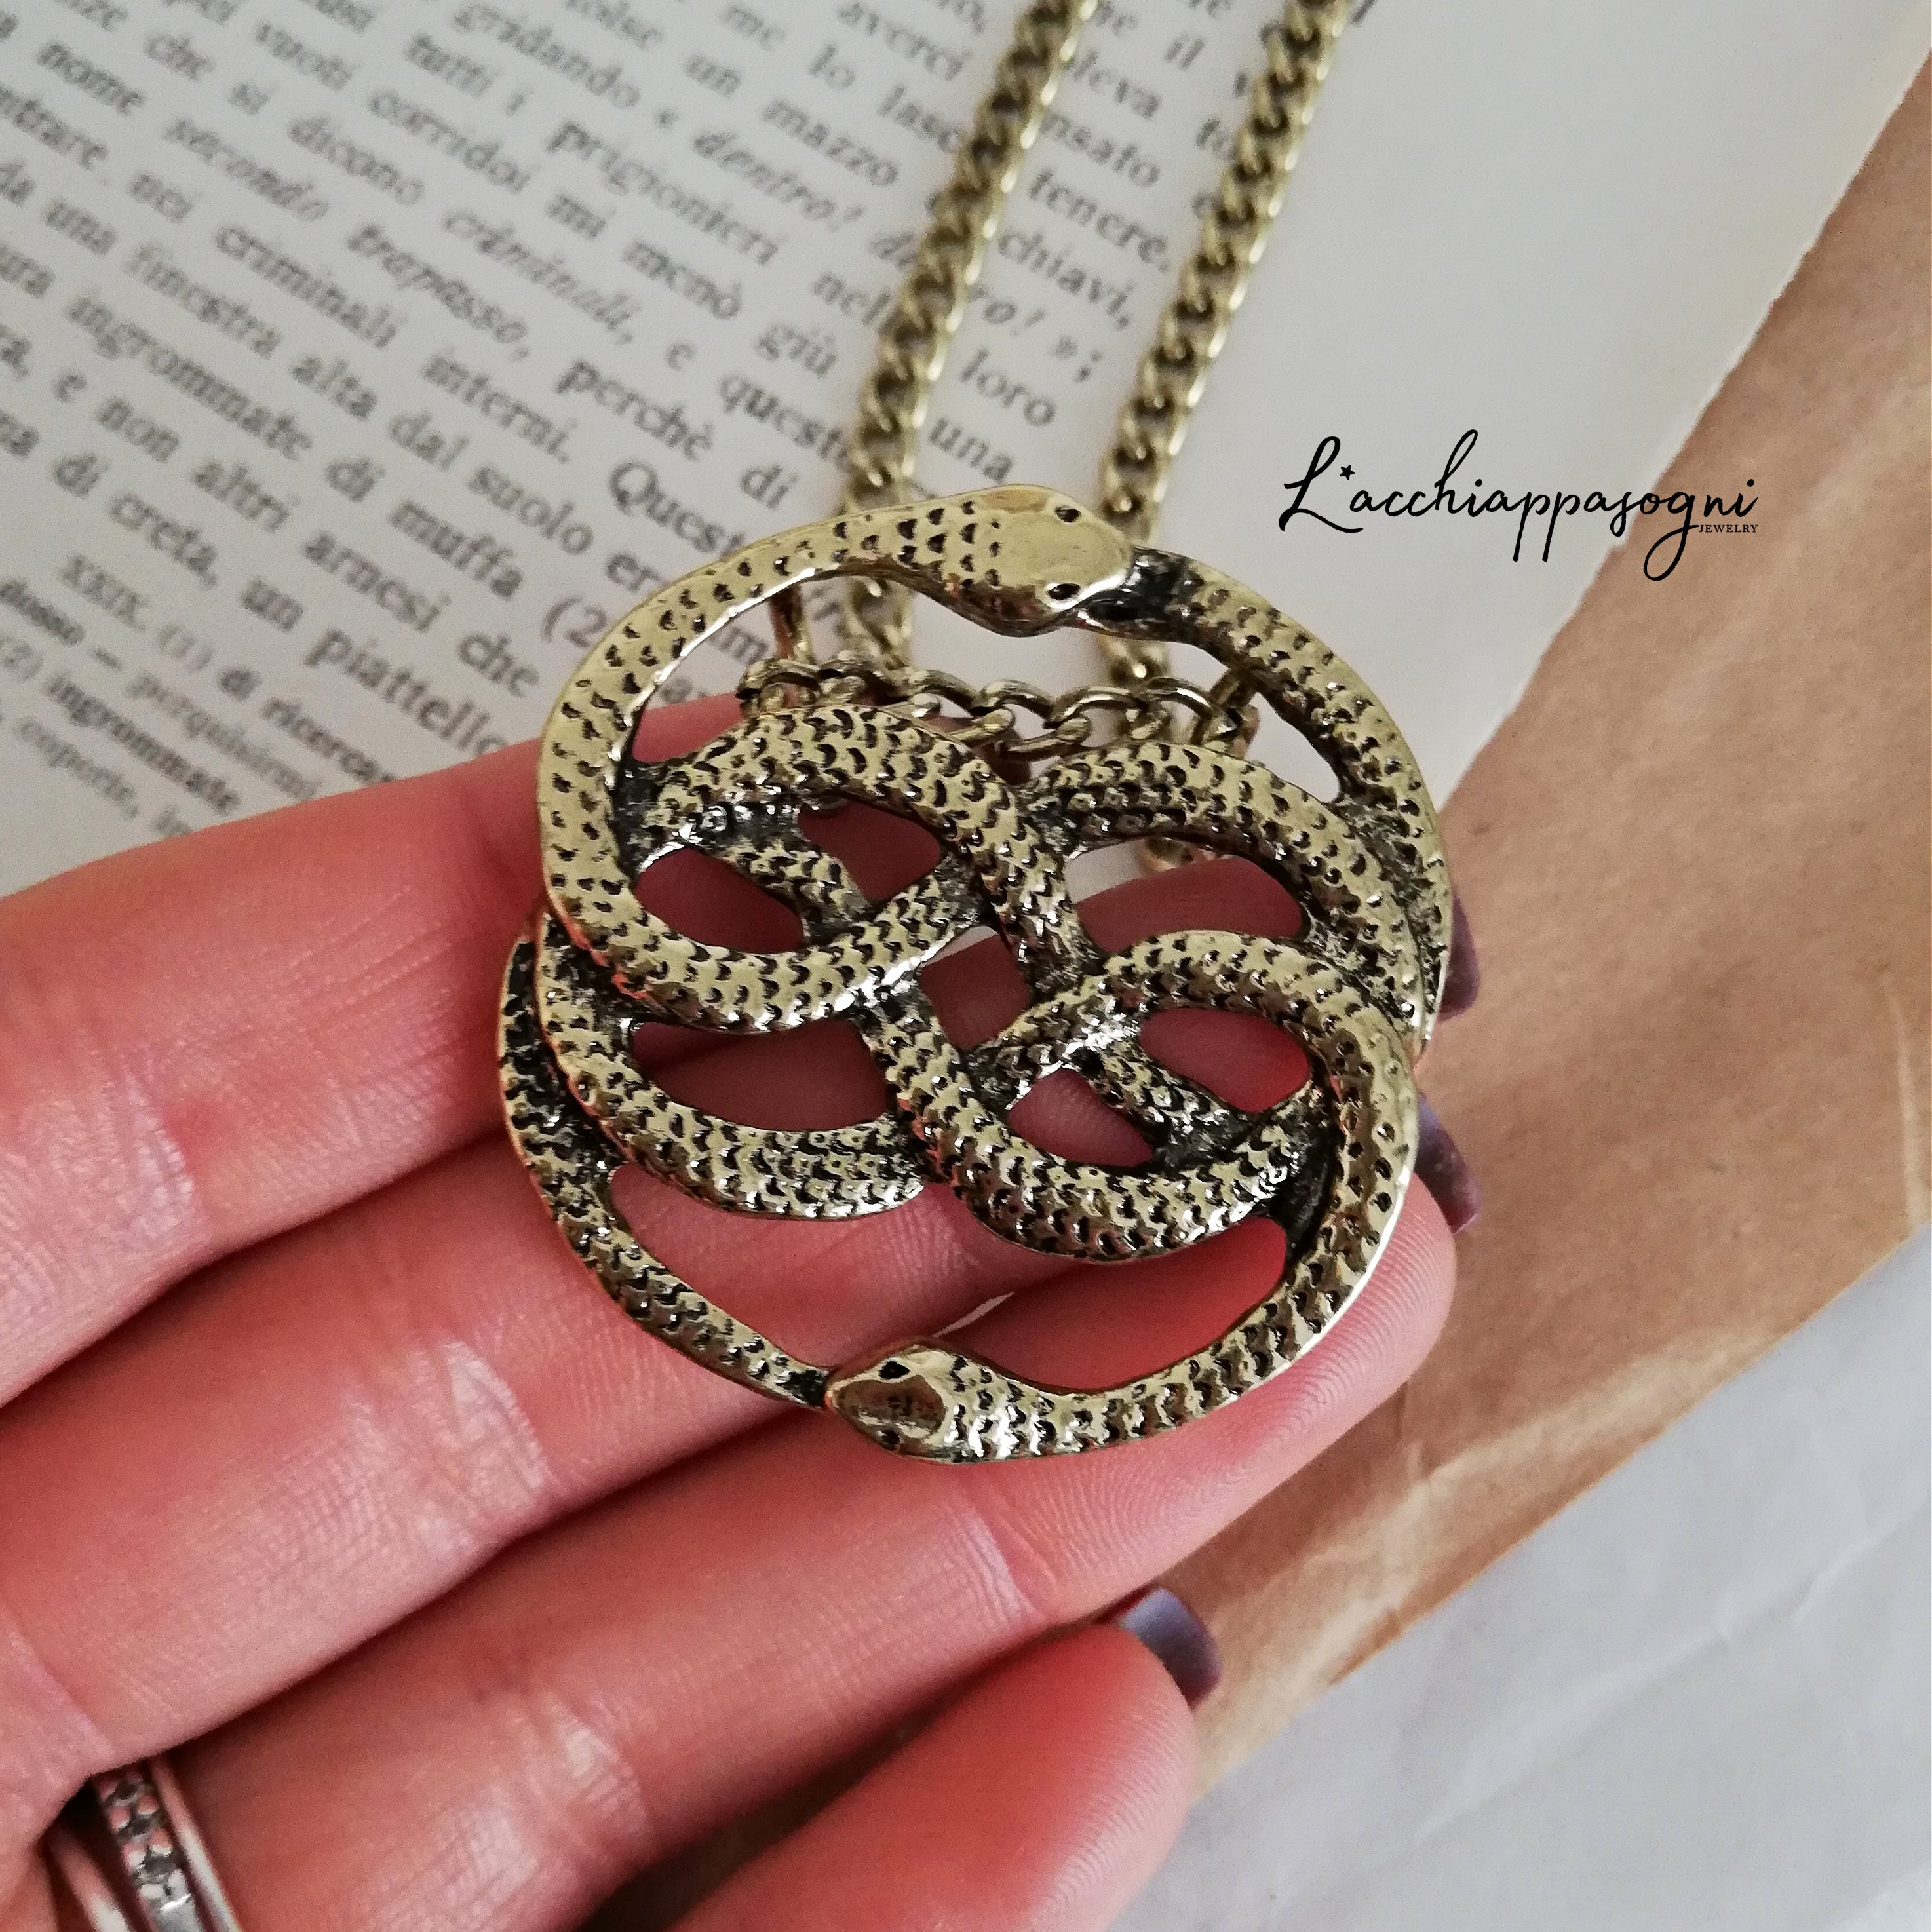 Auryn necklace Infinite snake necklace Snake jewelry Snake knot necklace  Ouroboros necklace Auryn pendant Neverending Story gift | Wish